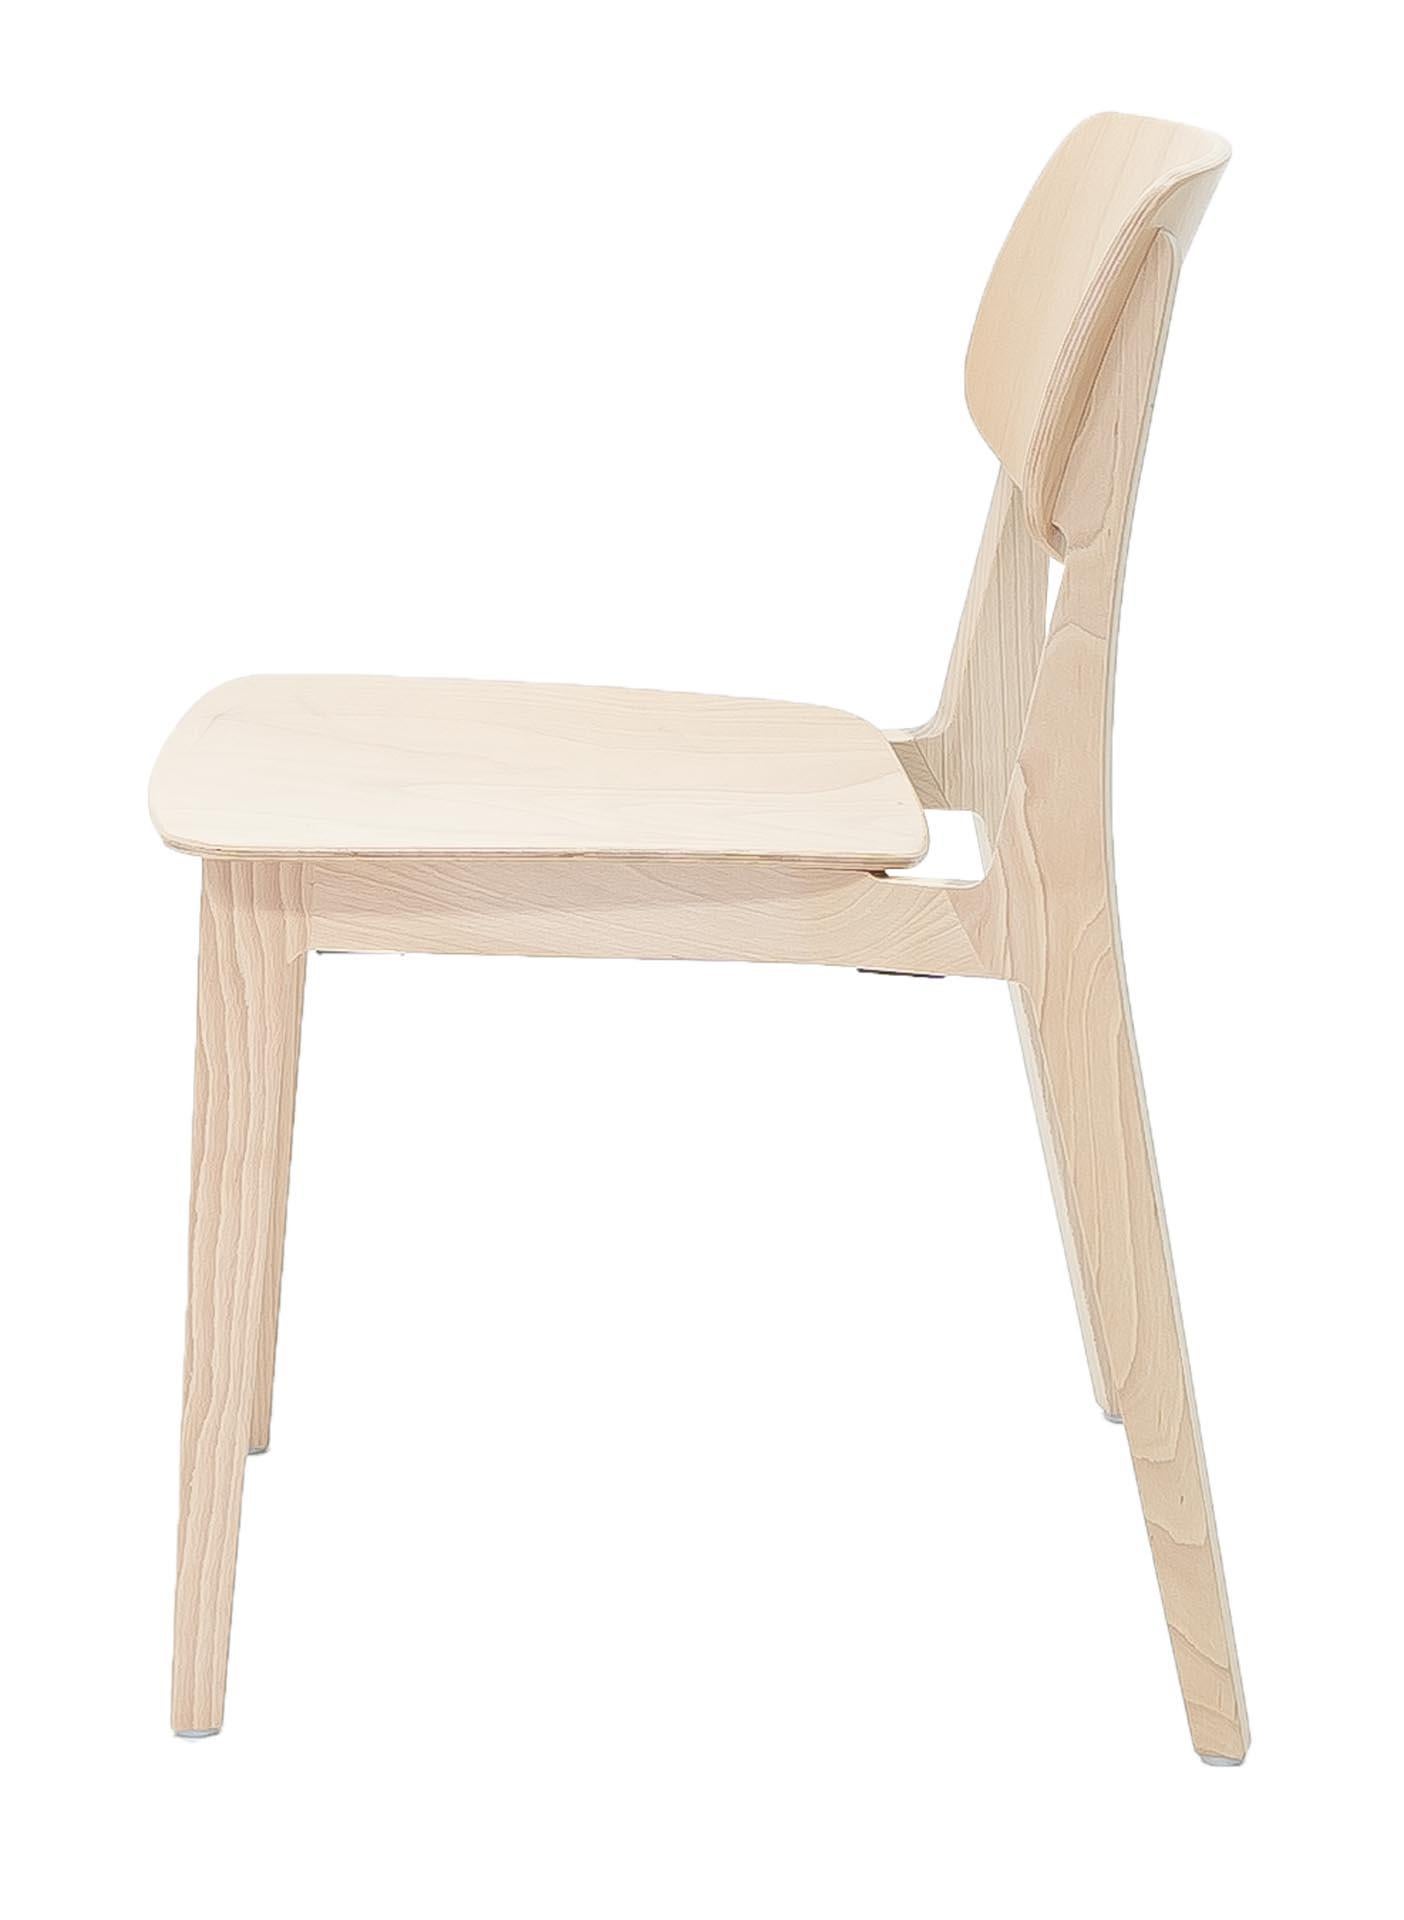 Hungarian Felber C14 Beech Wood Chairs by Dietiker, Exchangeable Back and Seat, Set of 2 For Sale